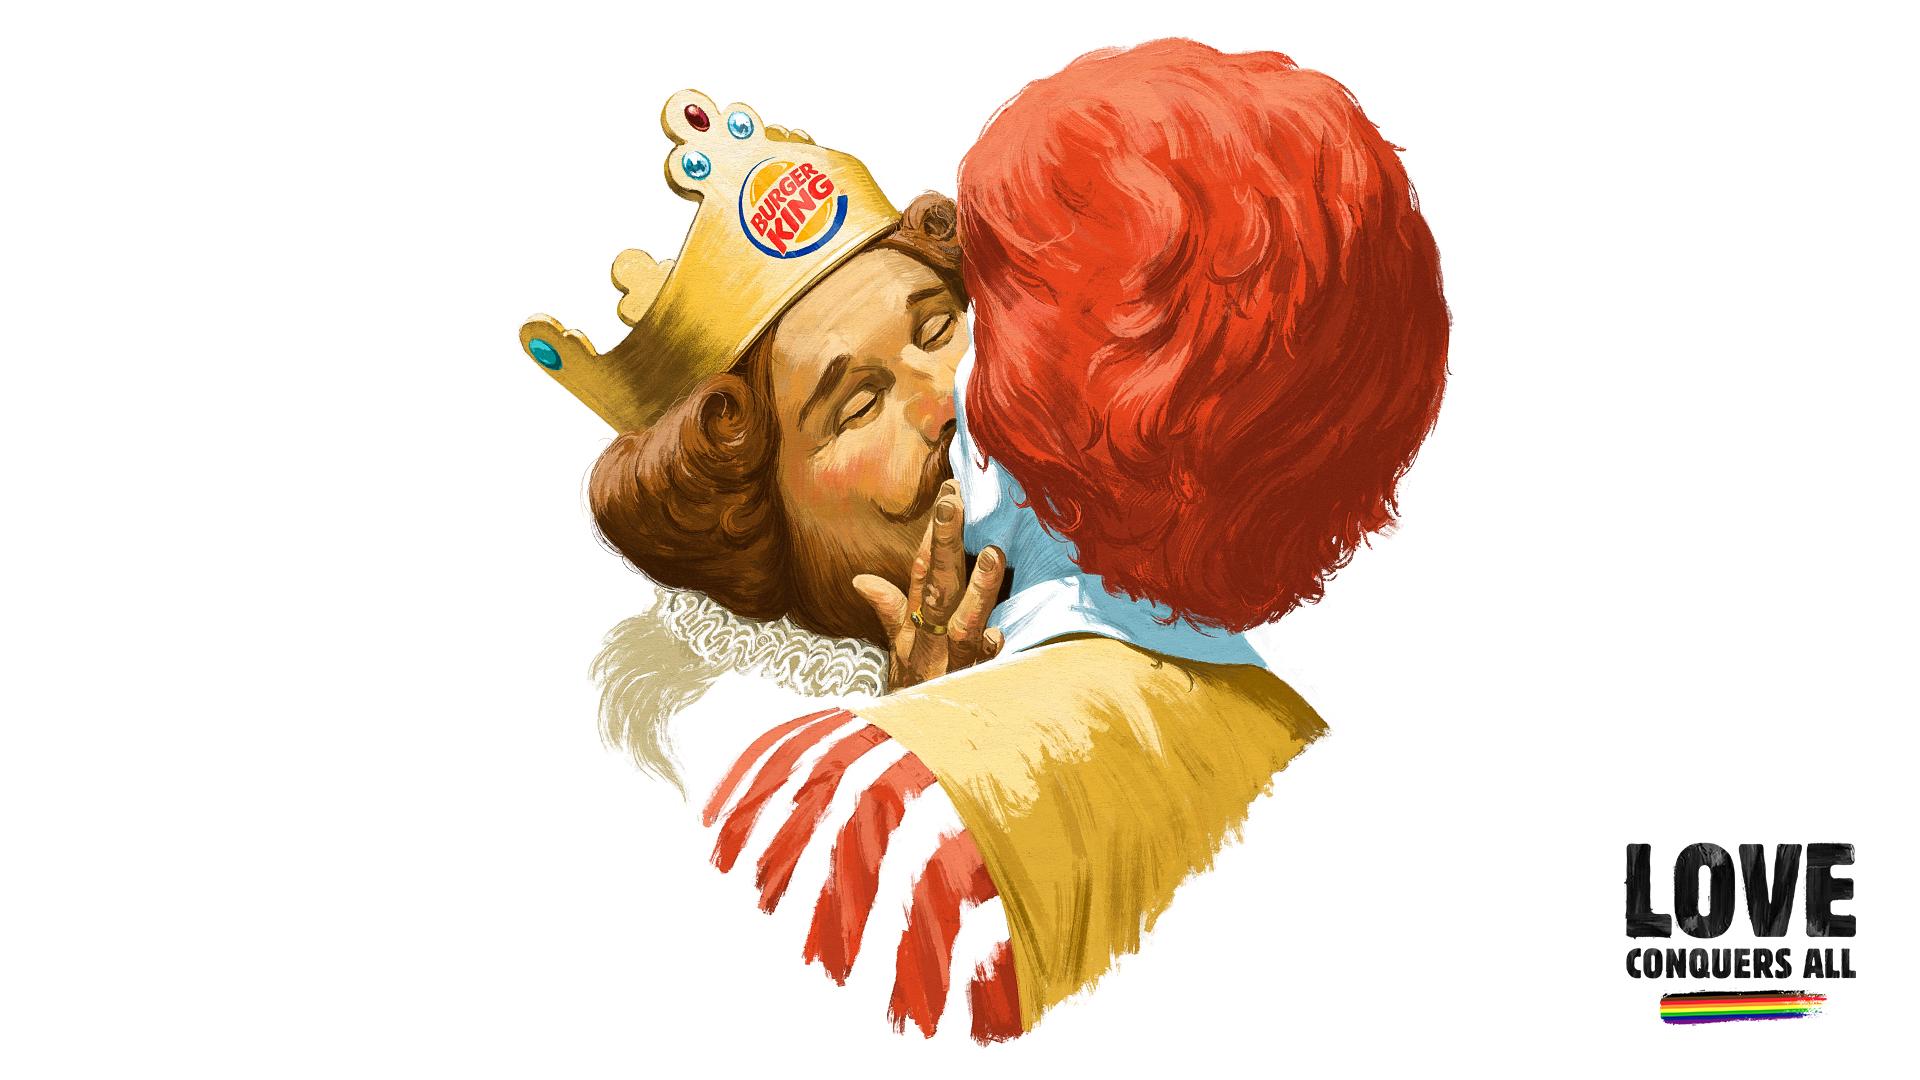 Bk Love Conquers All 1 Campaigns Of The World®